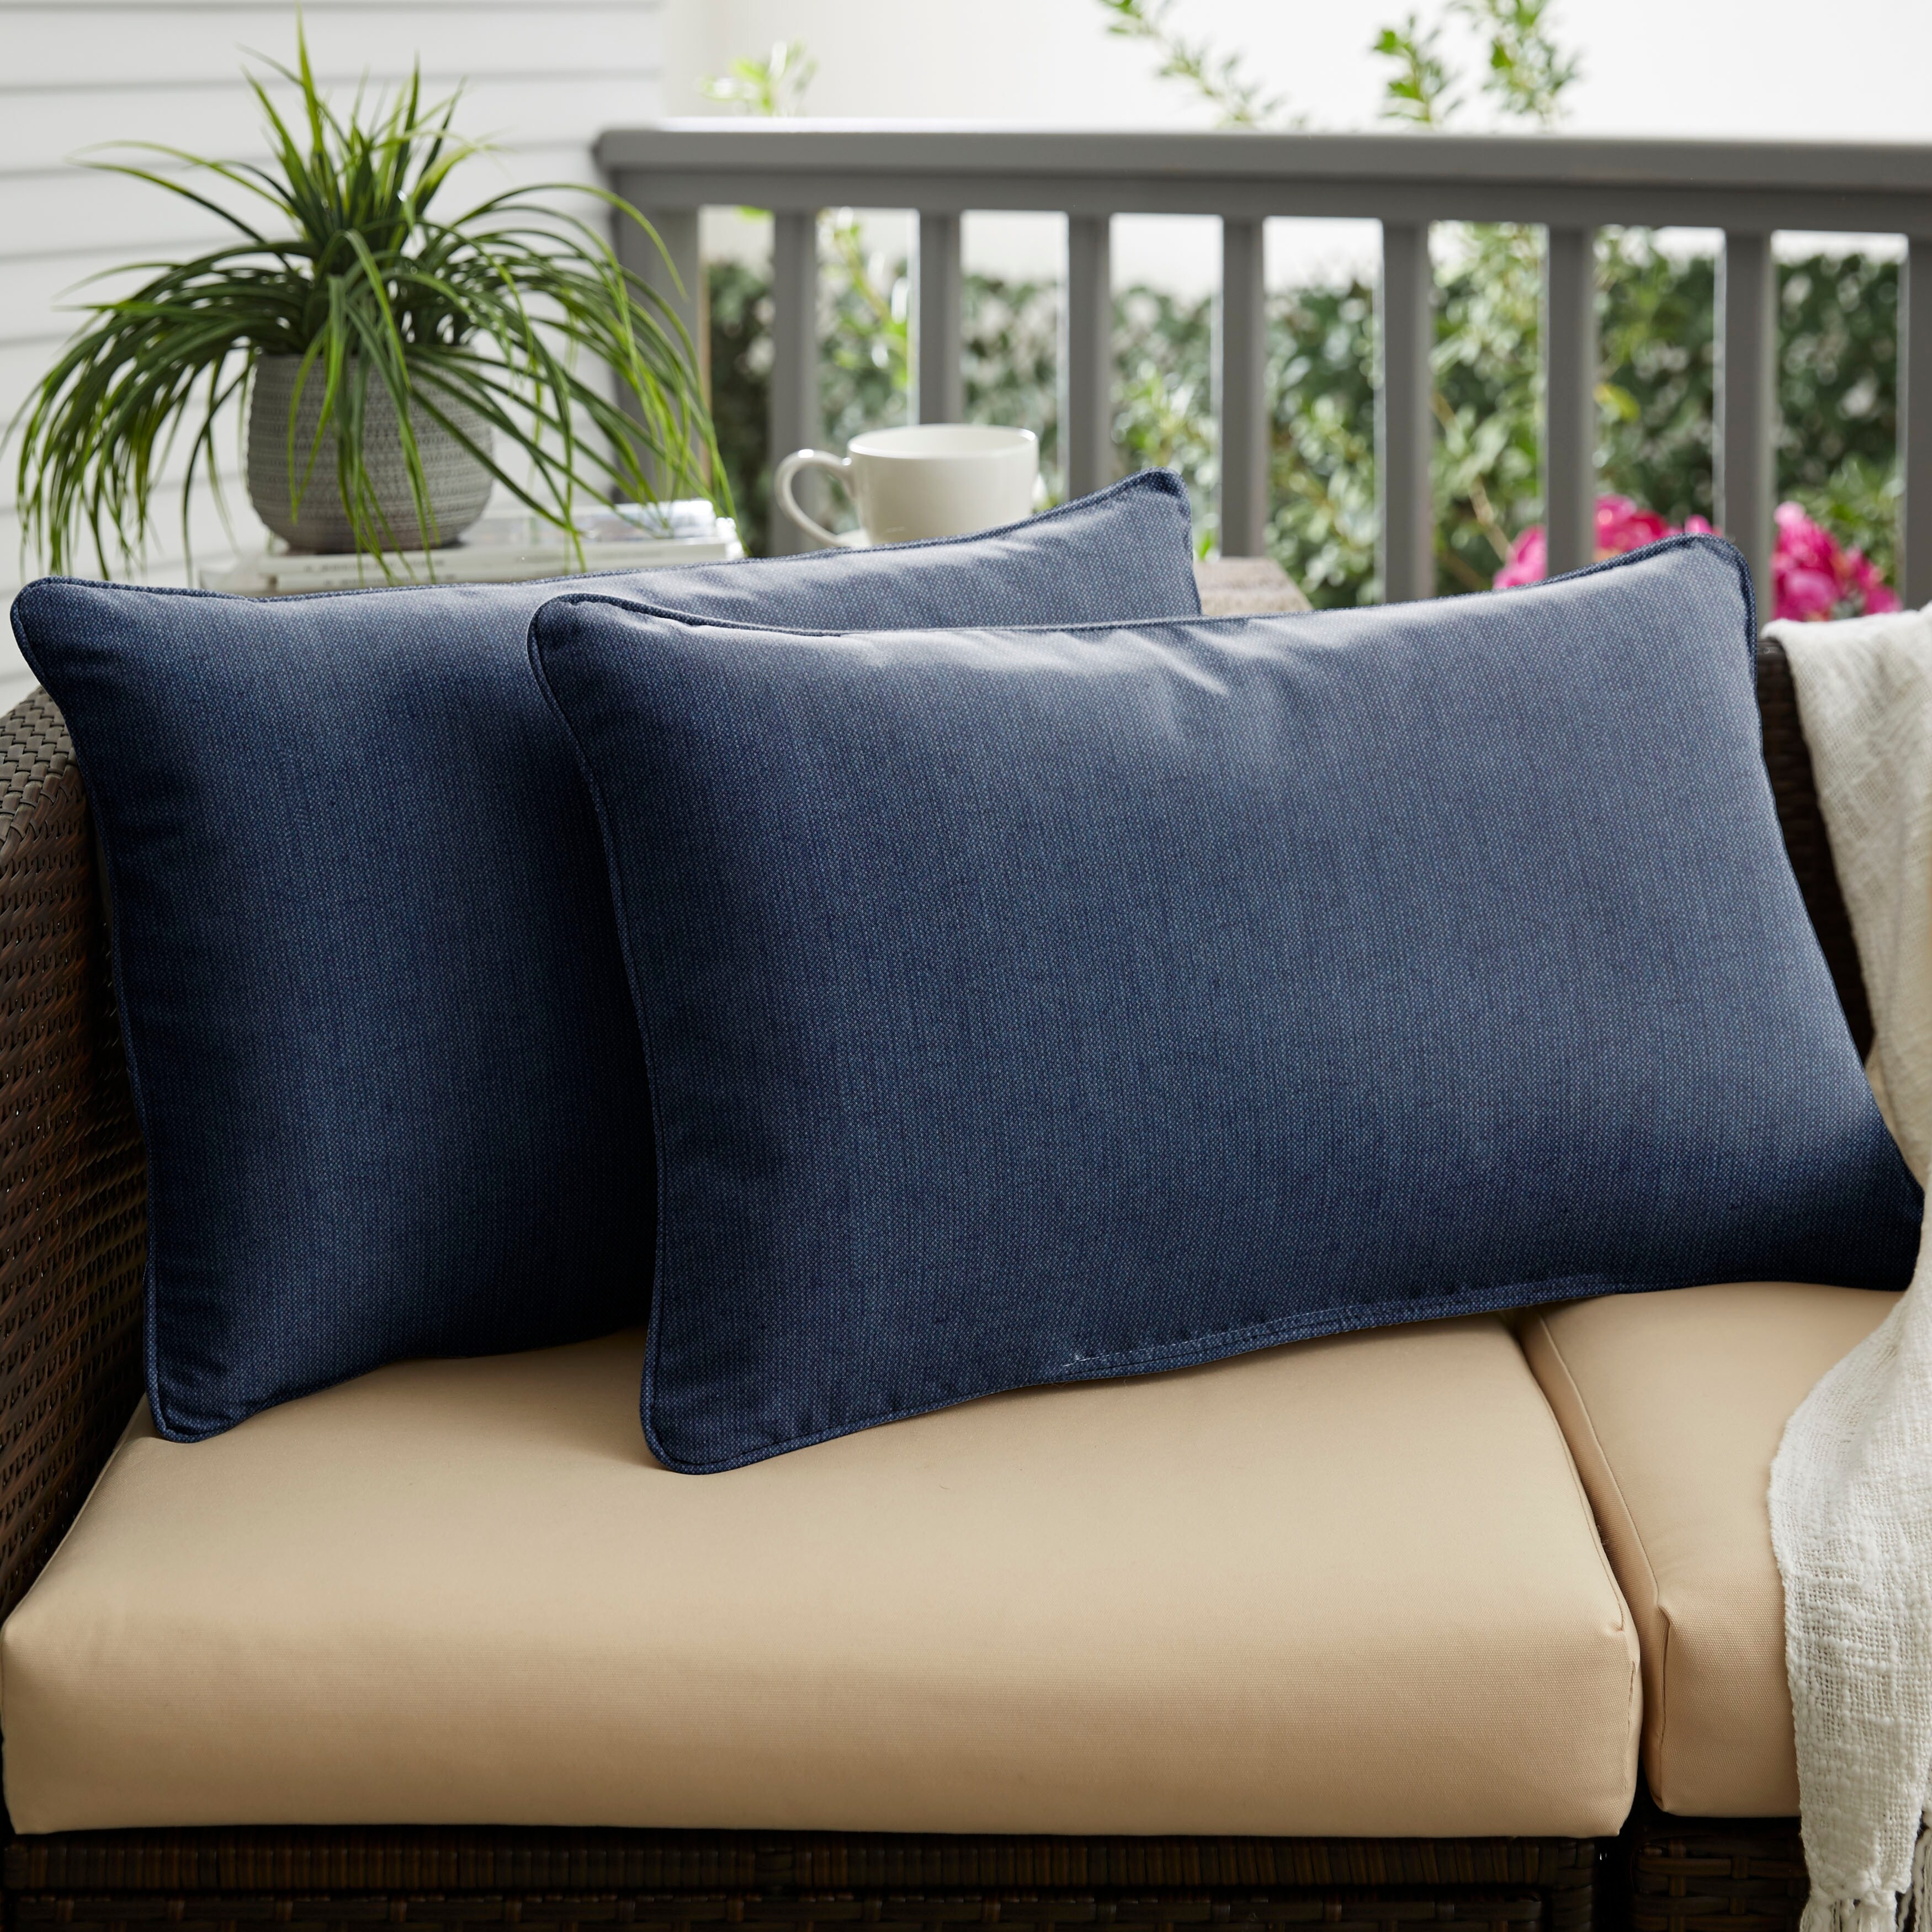 https://ak1.ostkcdn.com/images/products/is/images/direct/70c25573834cc30b5c9ab9b0afbb53a7f954c1f4/Sunbrella-Spectrum-Indigo-Corded-Indoor--Outdoor-Pillows-%28Set-of-2%29.jpg